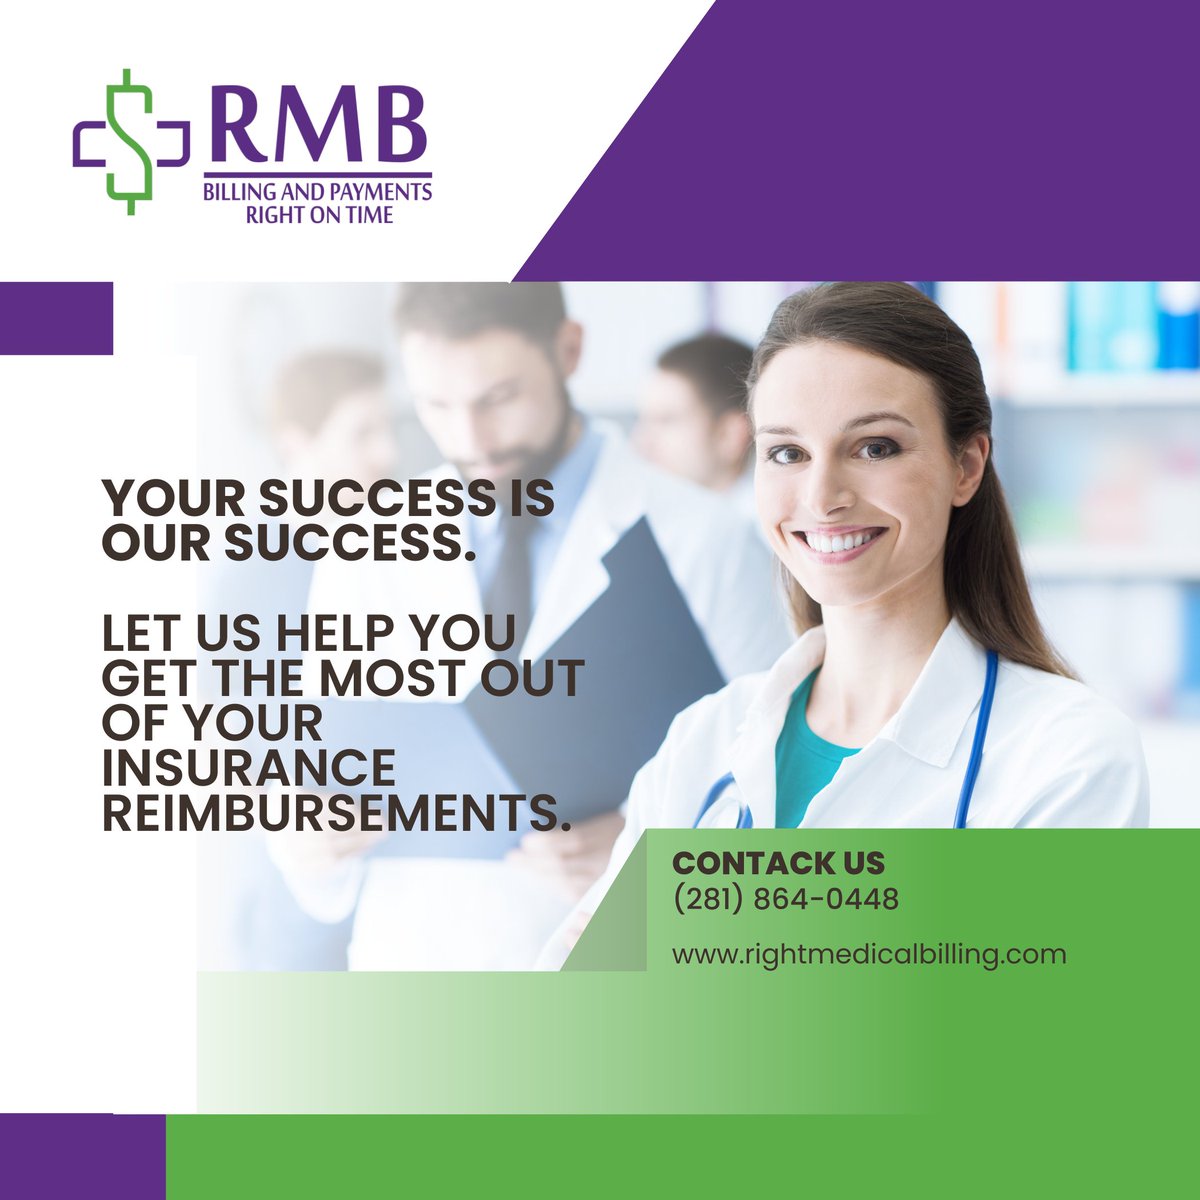 Talk to us today!
Ph # (281) 864-0448
Email: sales@rightmedicalbilling.com
#medicalbillingservices #healthcarebilling #medicalcoding #doctors #revenuecyclemanagement